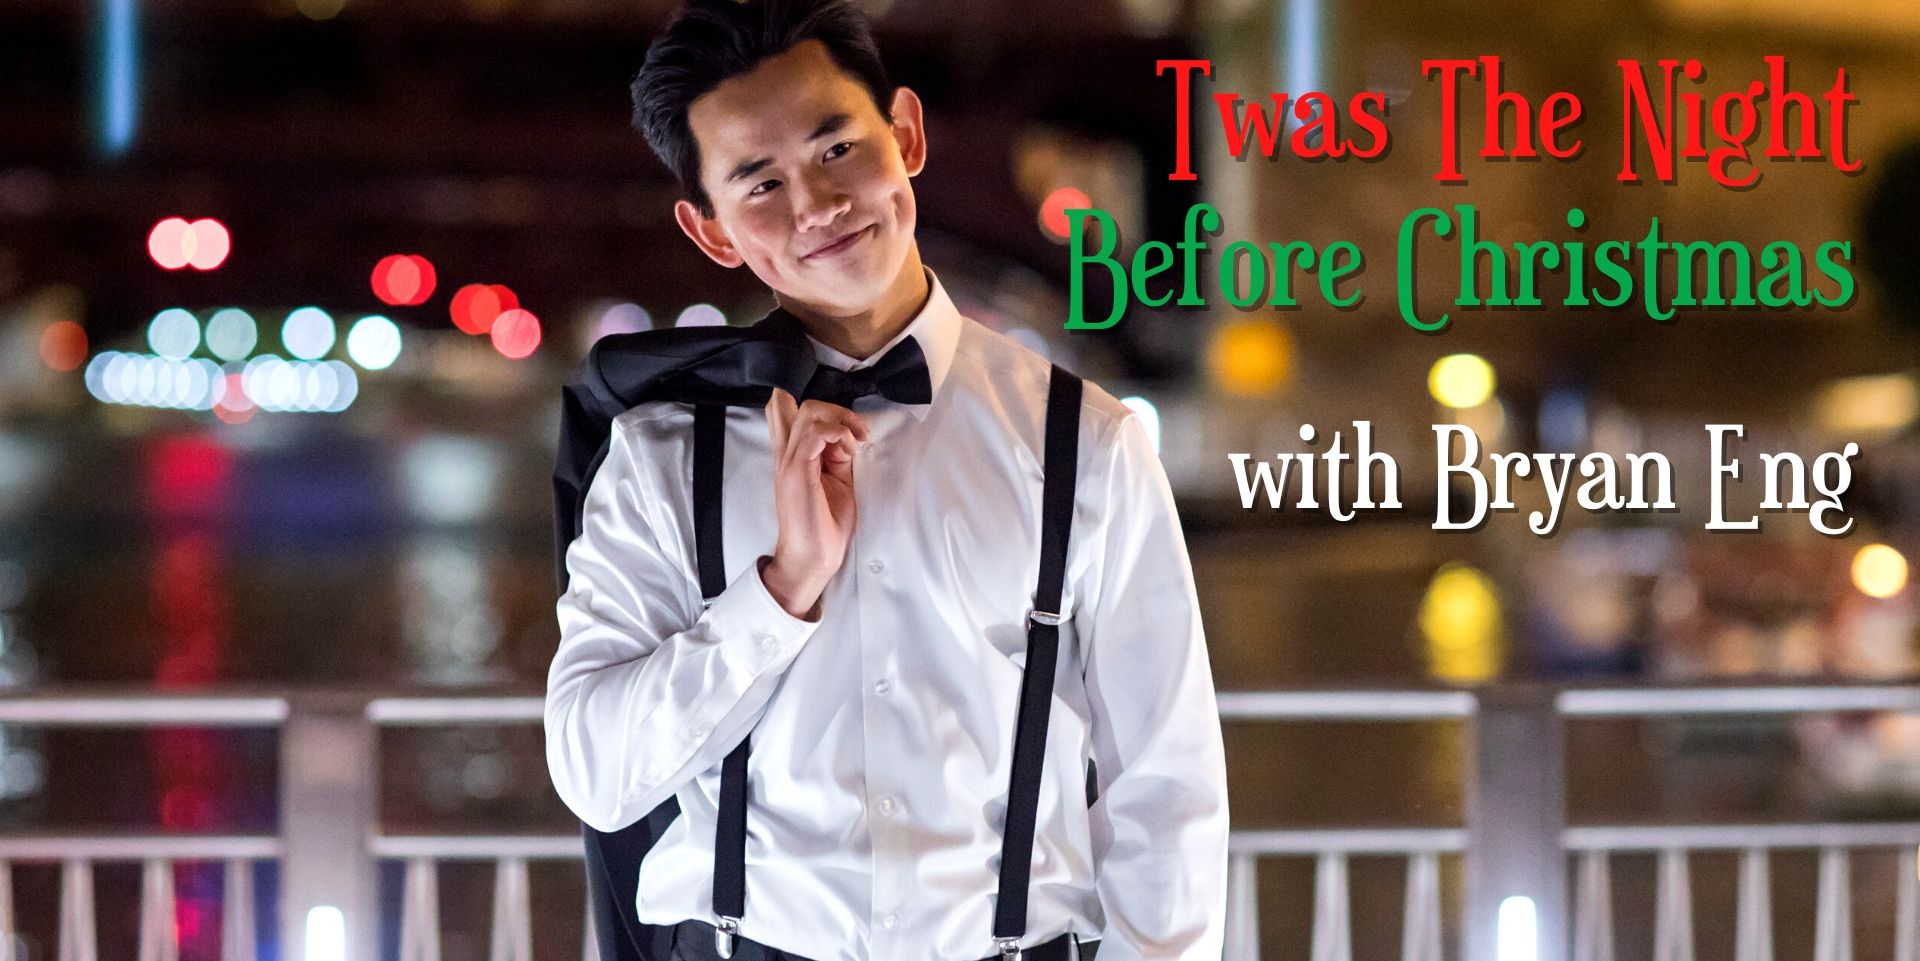 Twas The Night Before Christmas with Bryan Eng promotional image